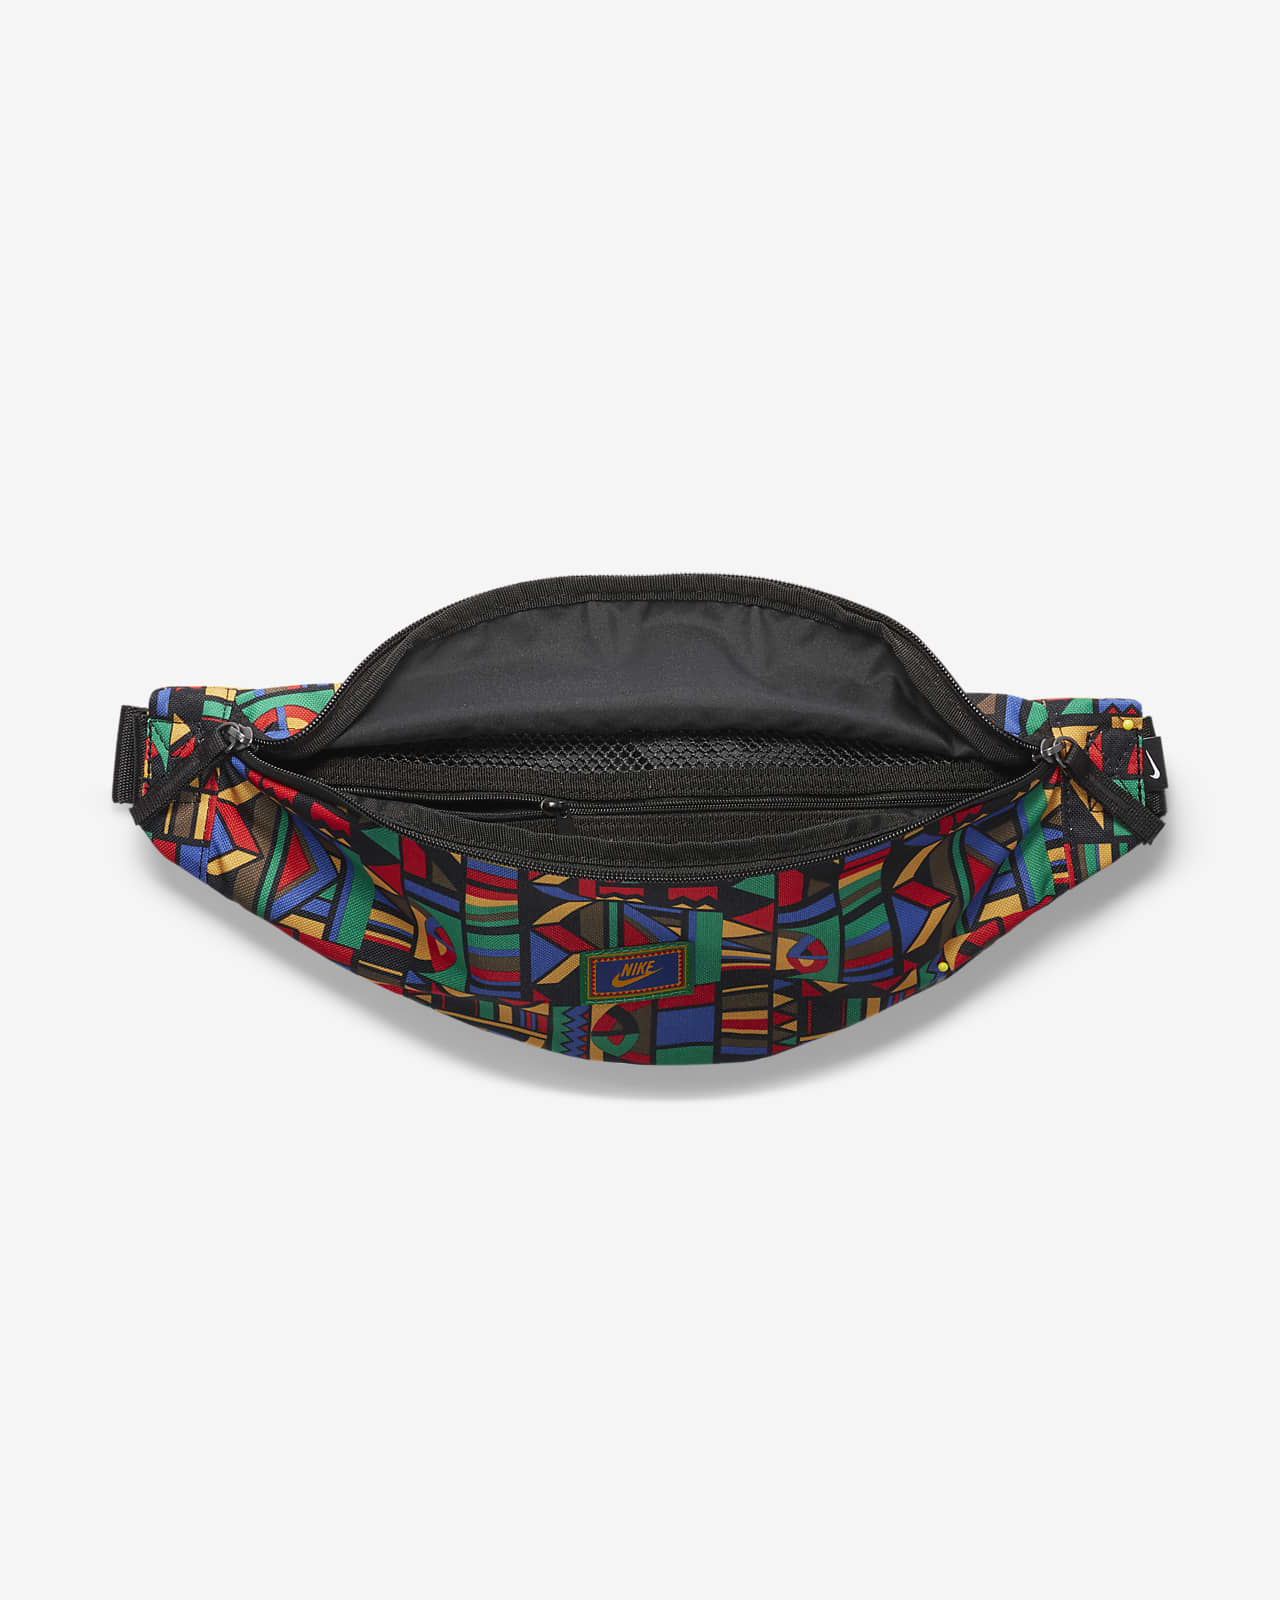 nike fanny pack heritage